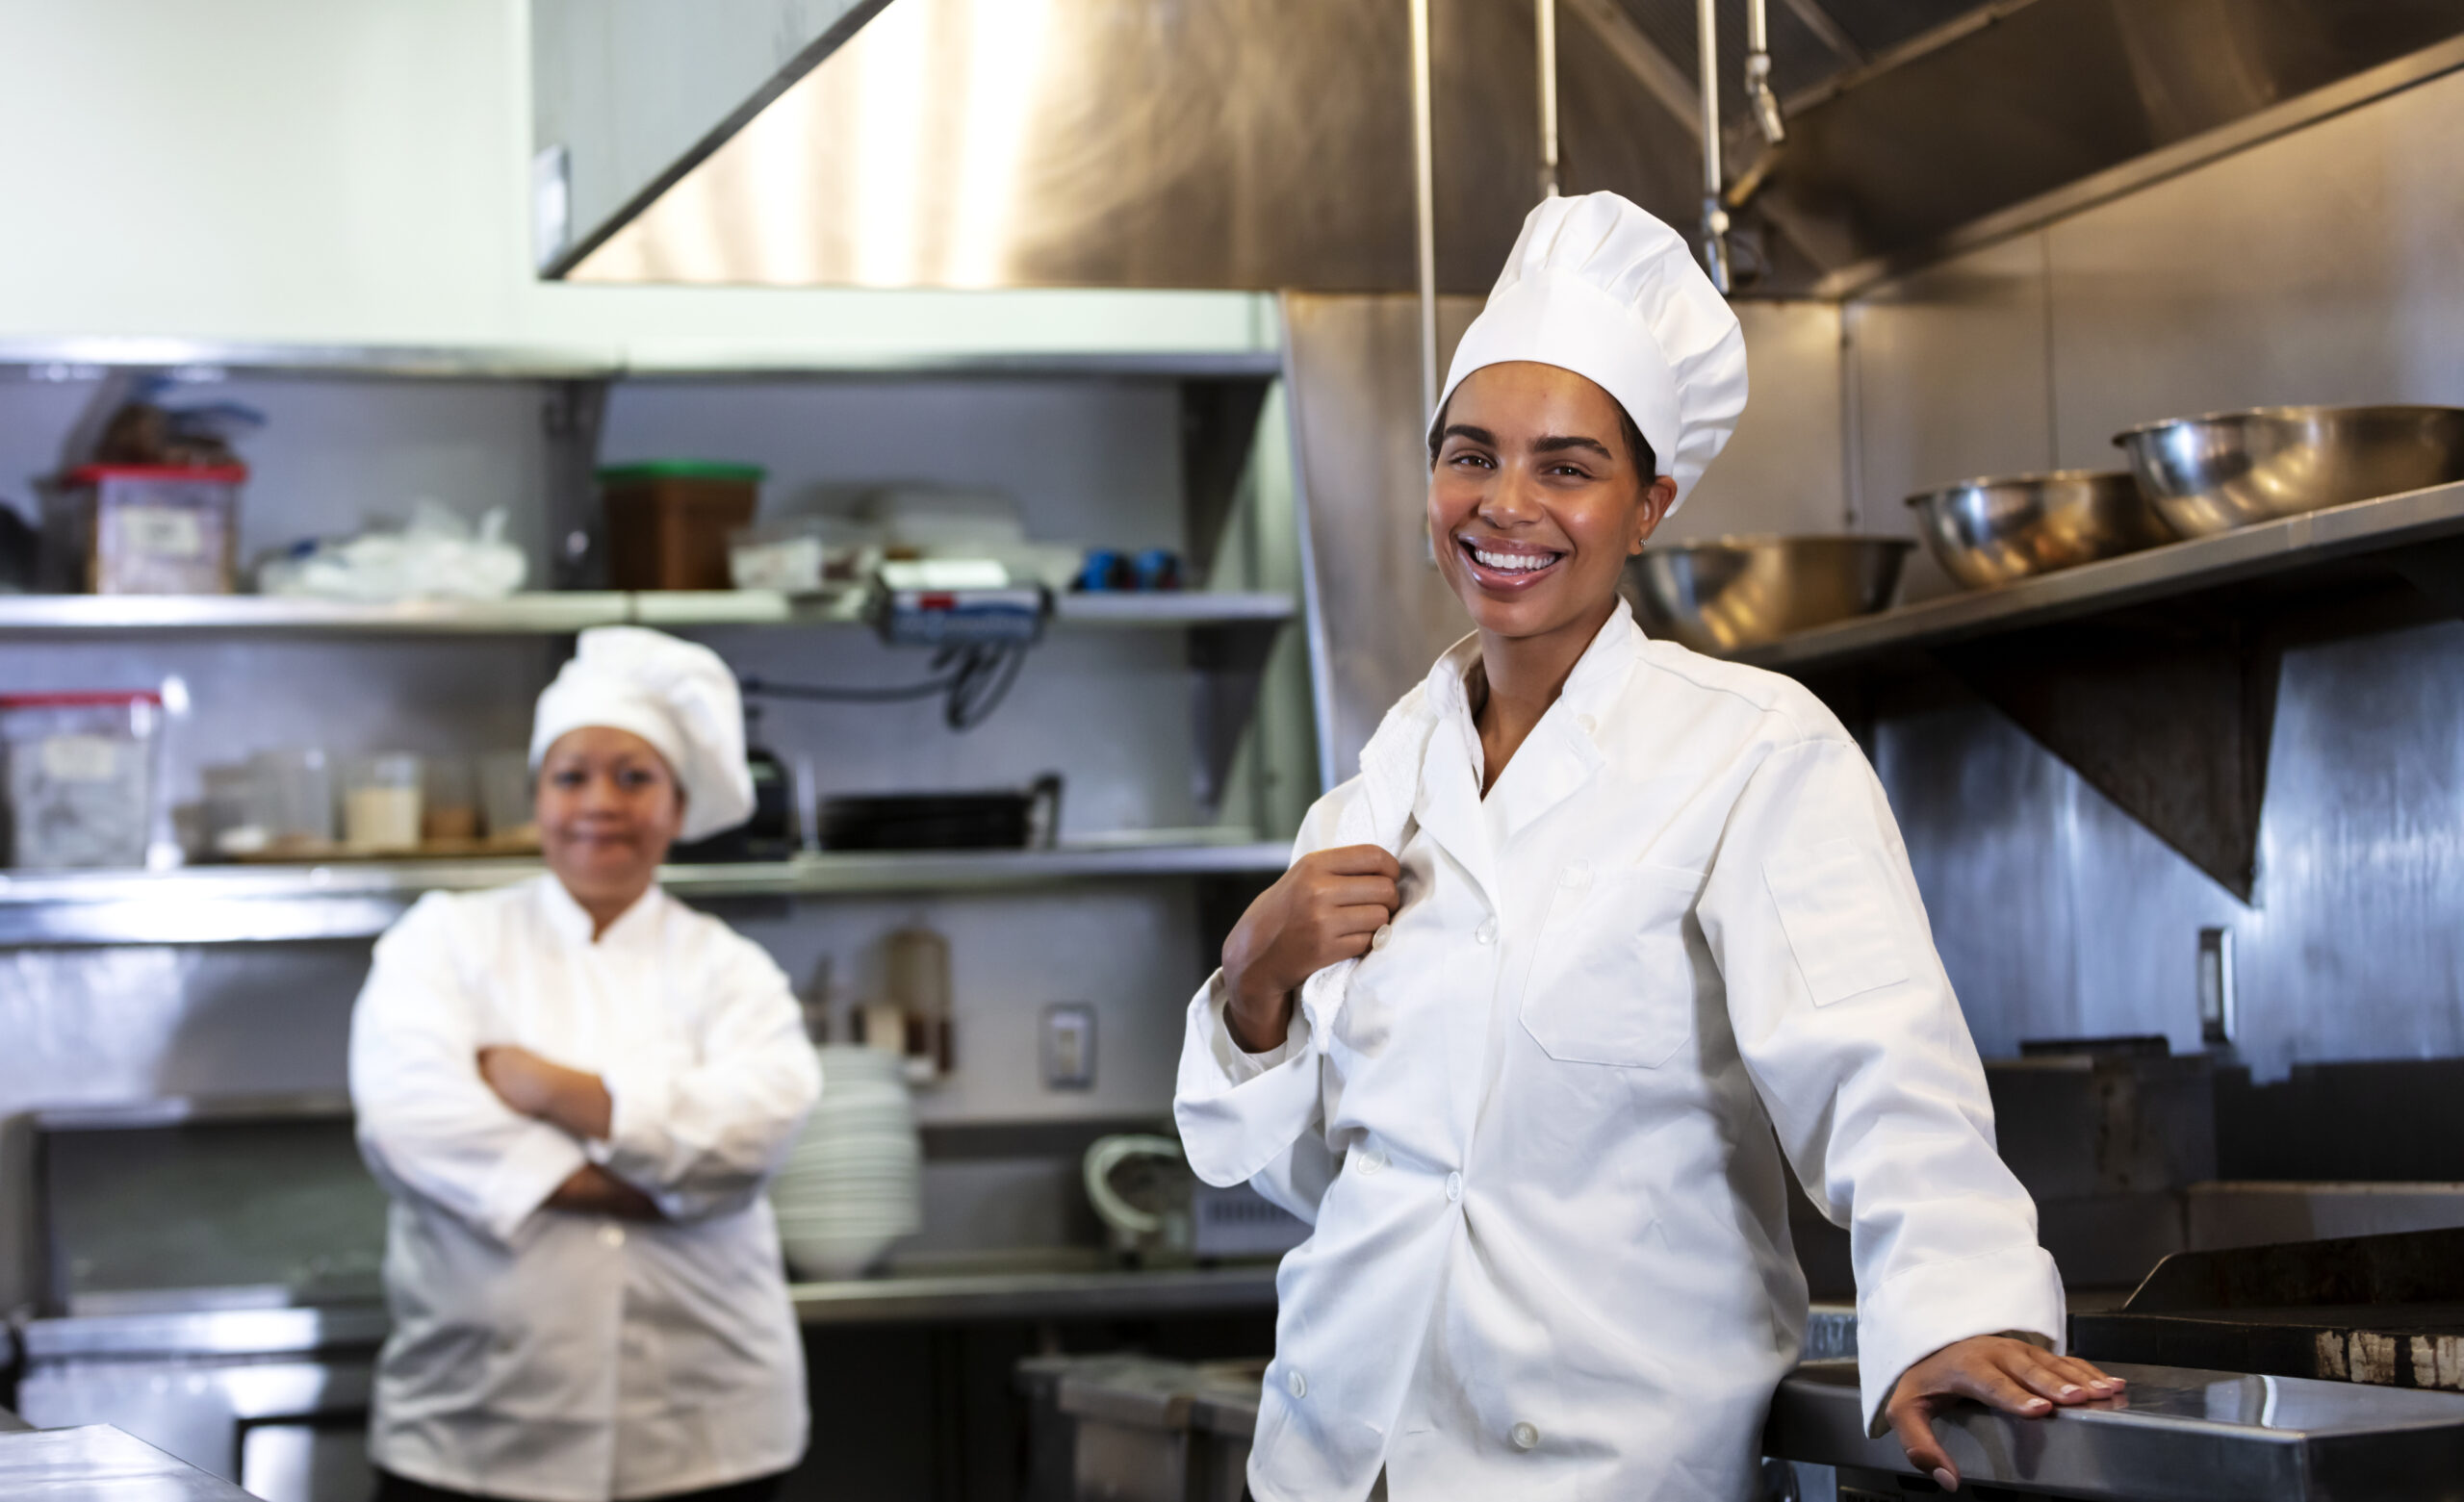 Two women in their 30s working as chefs in a restaurant. They are in the commercial kitchen wearing chef's whites, looking over the service counter.